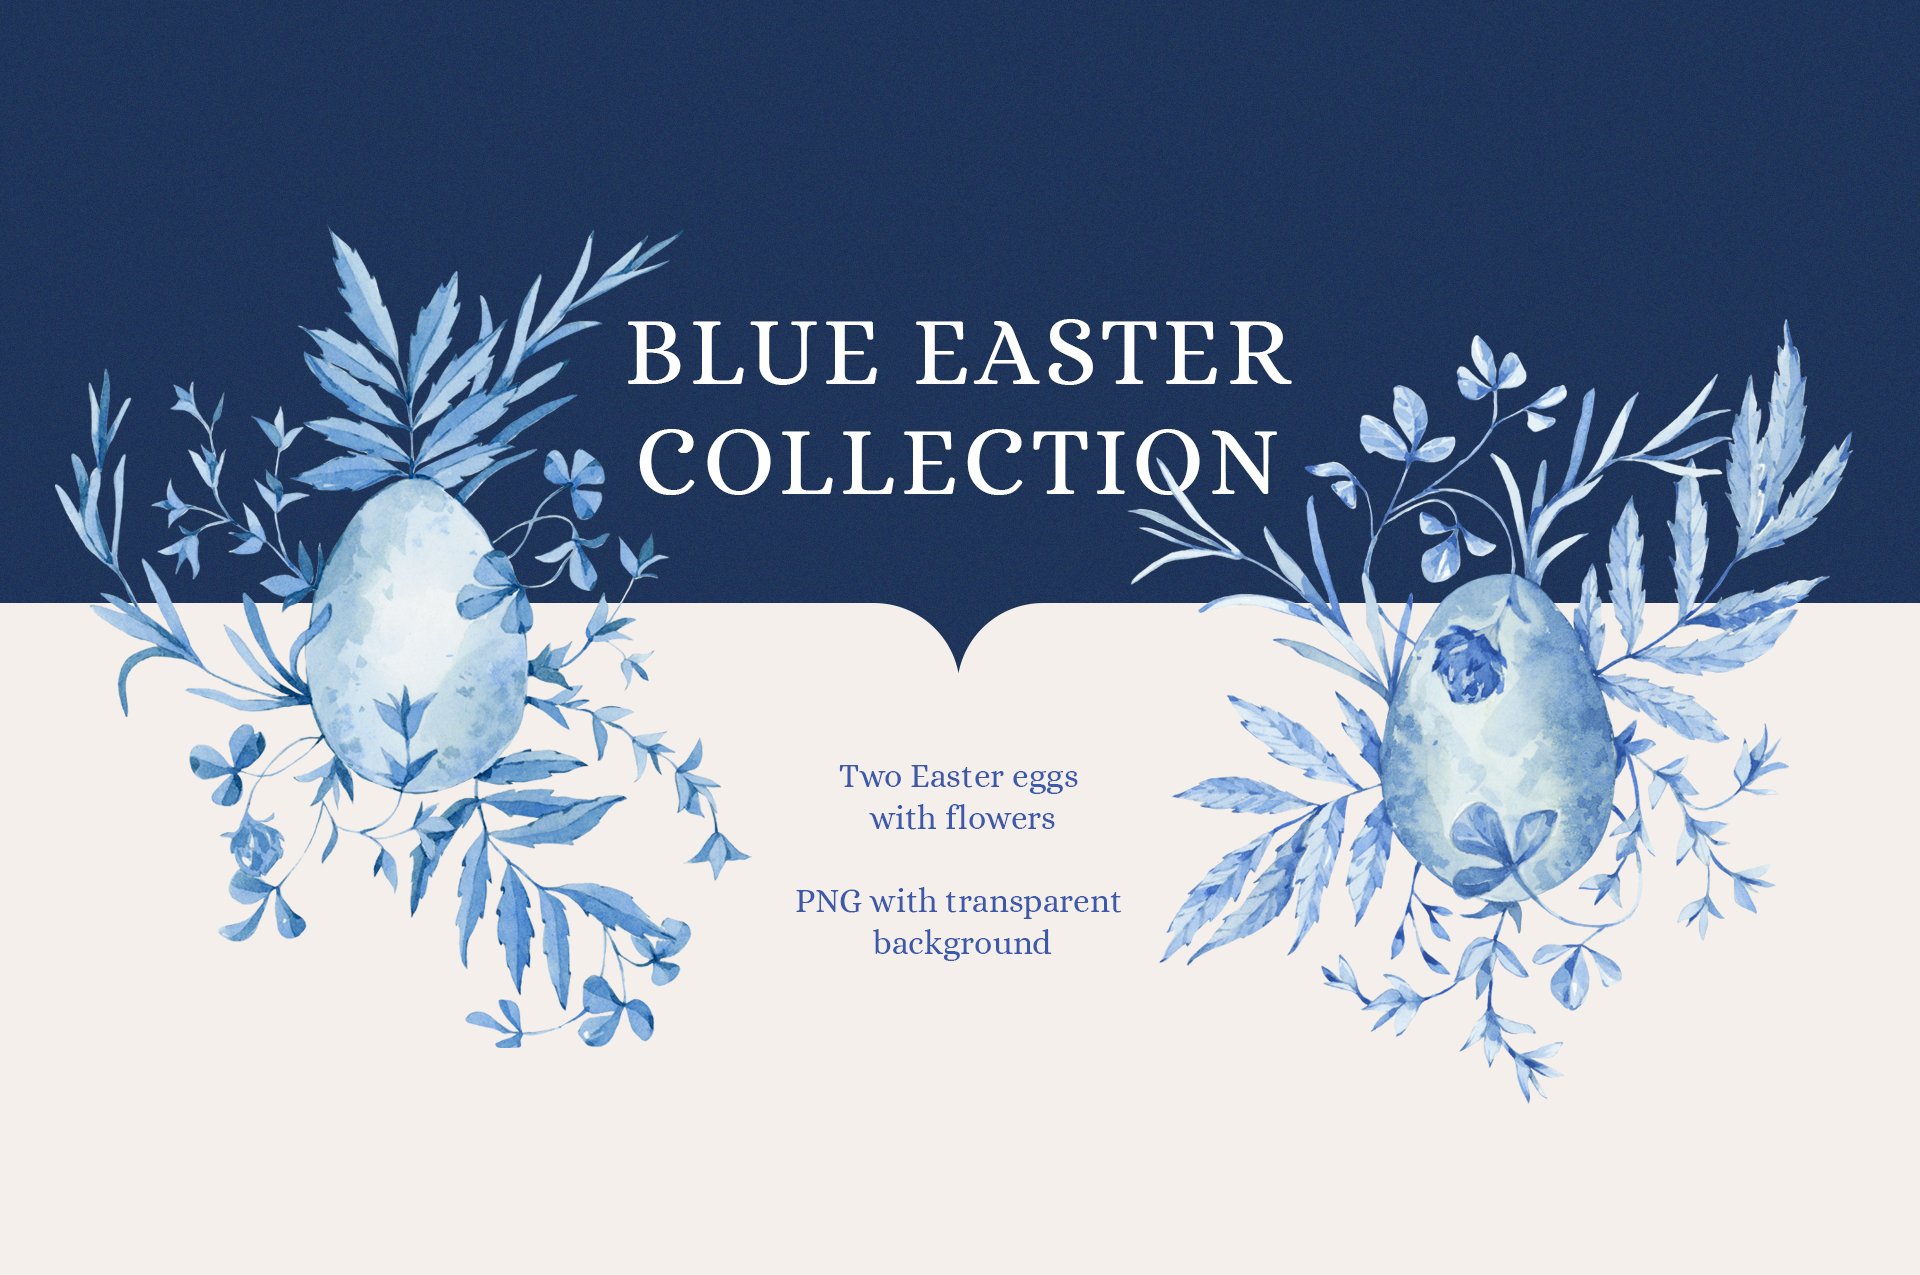 5 876Blue Easter collection.